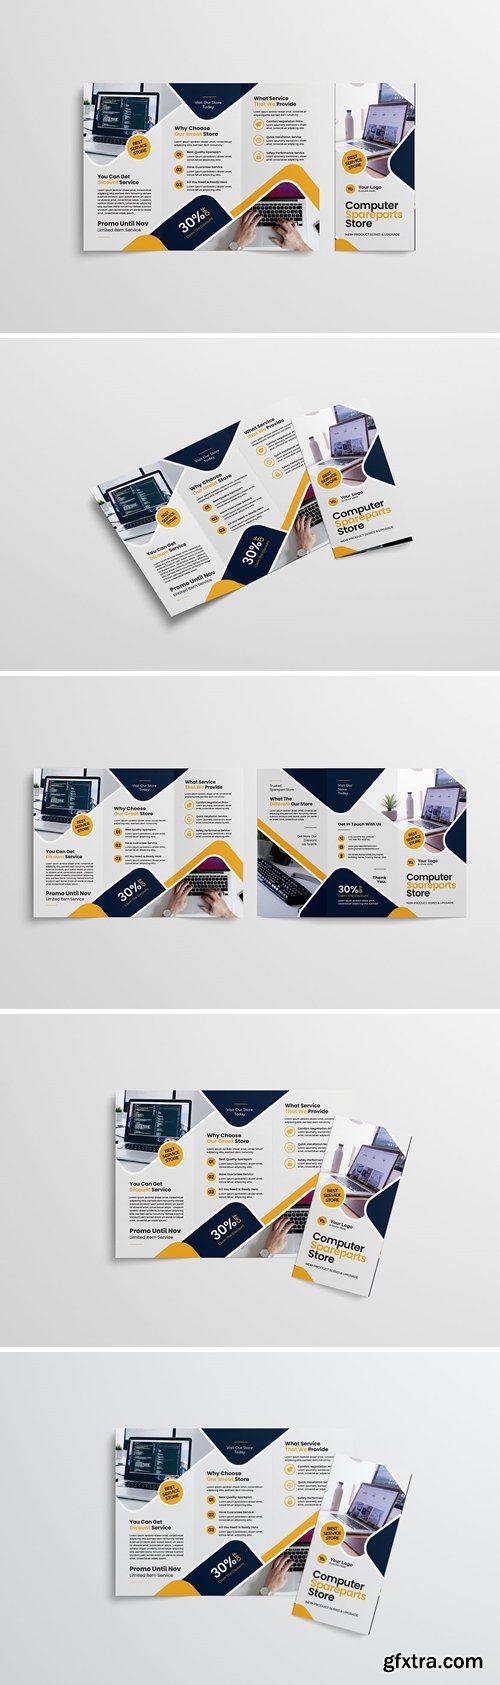 Computer Spareparts Store Trifold Brochure